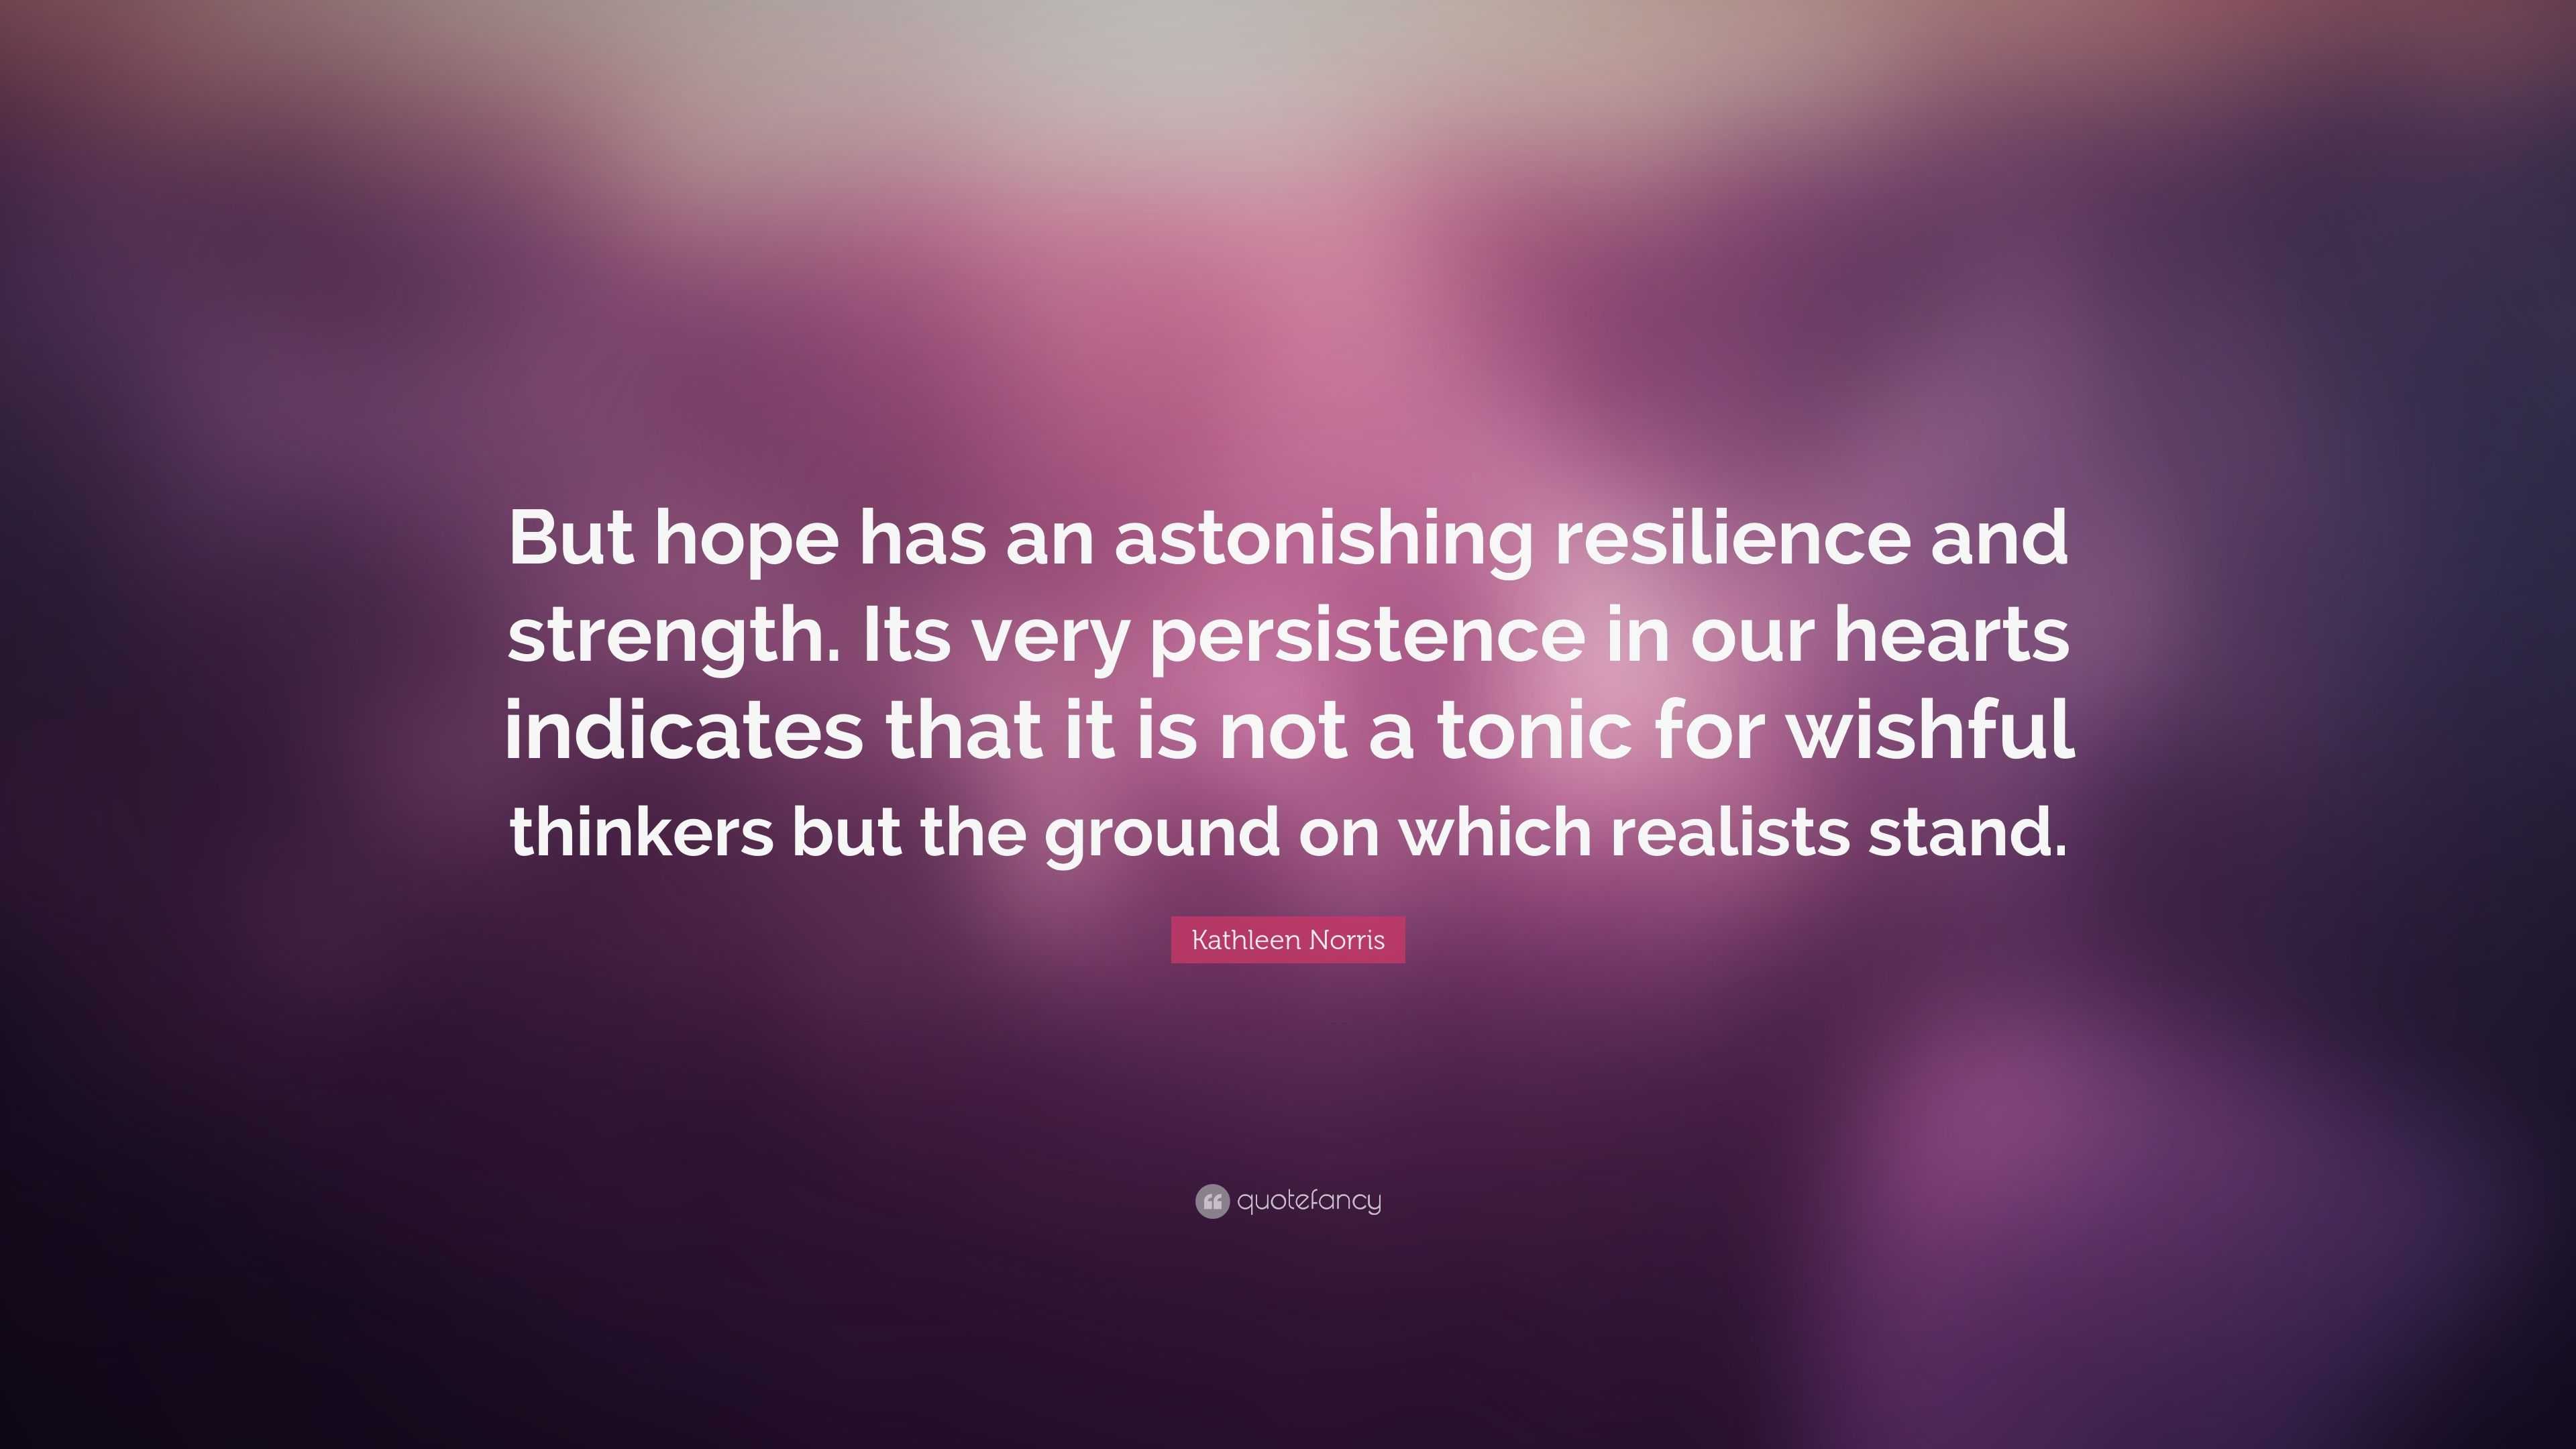 Kathleen Norris Quote: “But hope has an astonishing resilience and ...